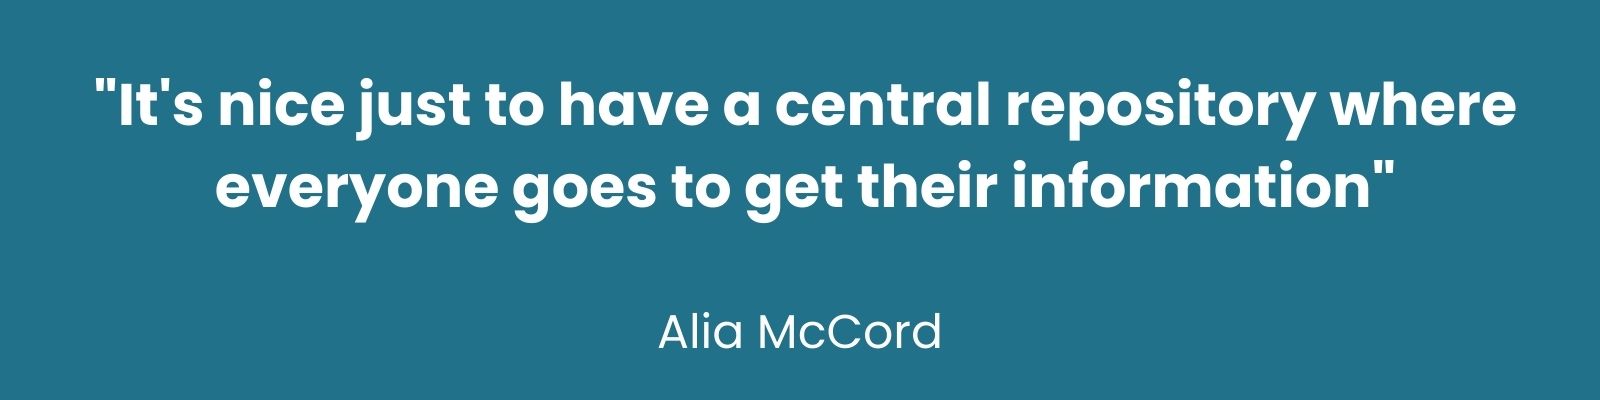 "It's nice just to have a central repository where everyone goes to get their information" - Alia McCord